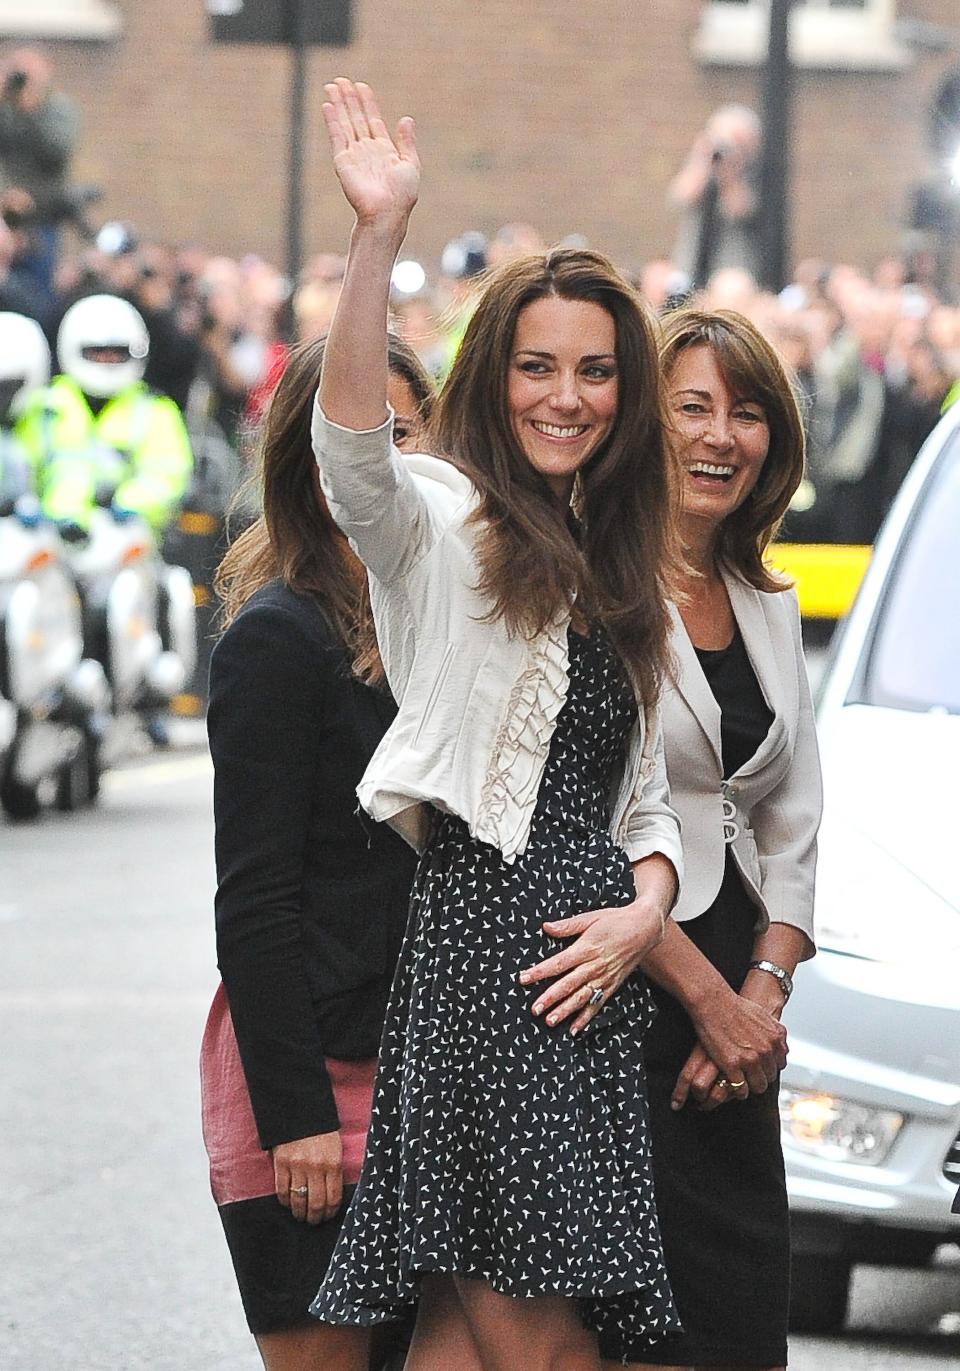 Kate Middleton, Carole Middleton, and Pippa Middleton ahead of Kate and Prince William's wedding on April 28, 2011 in London, England.